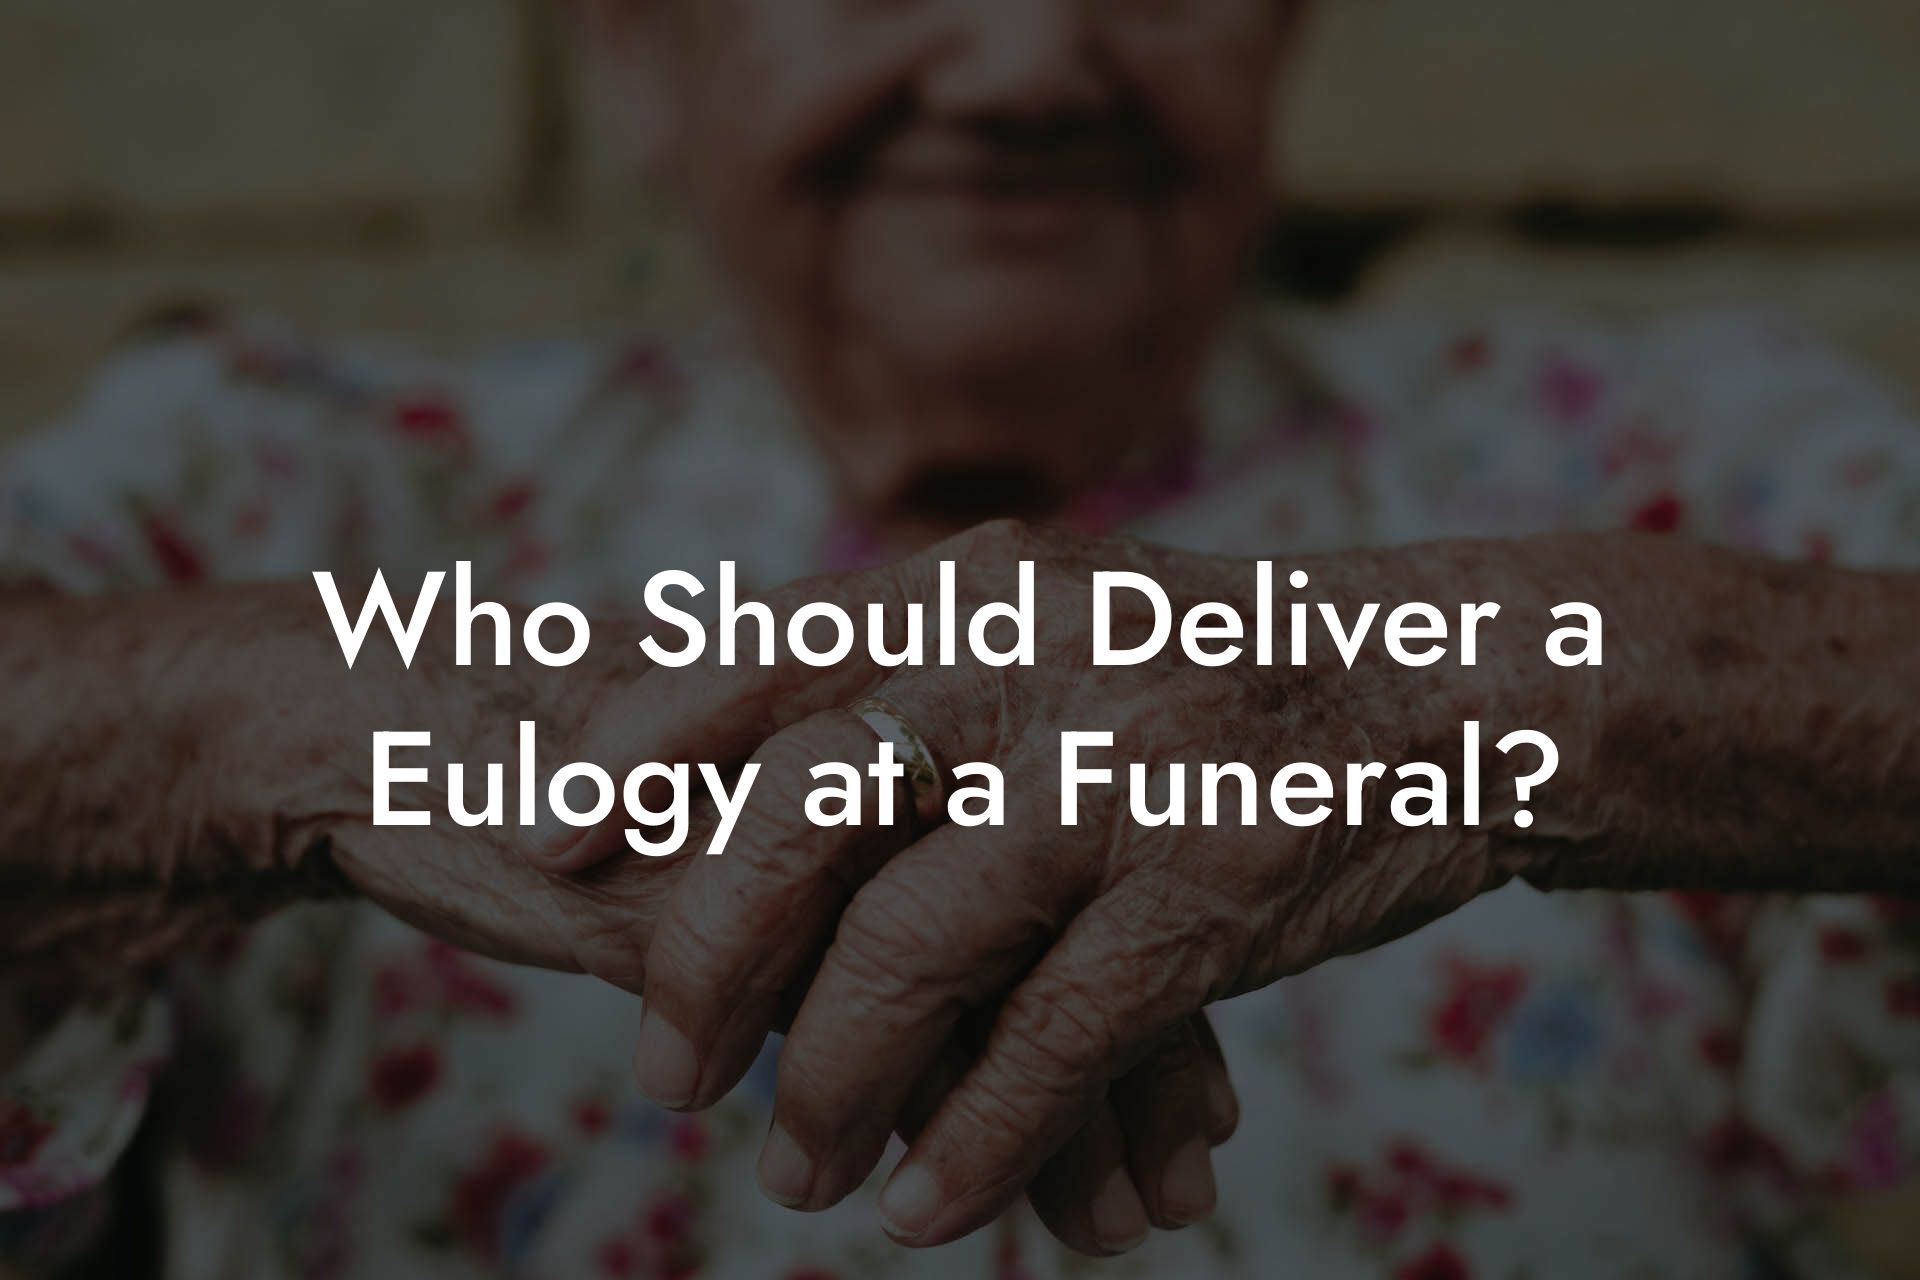 Who Should Deliver a Eulogy at a Funeral?